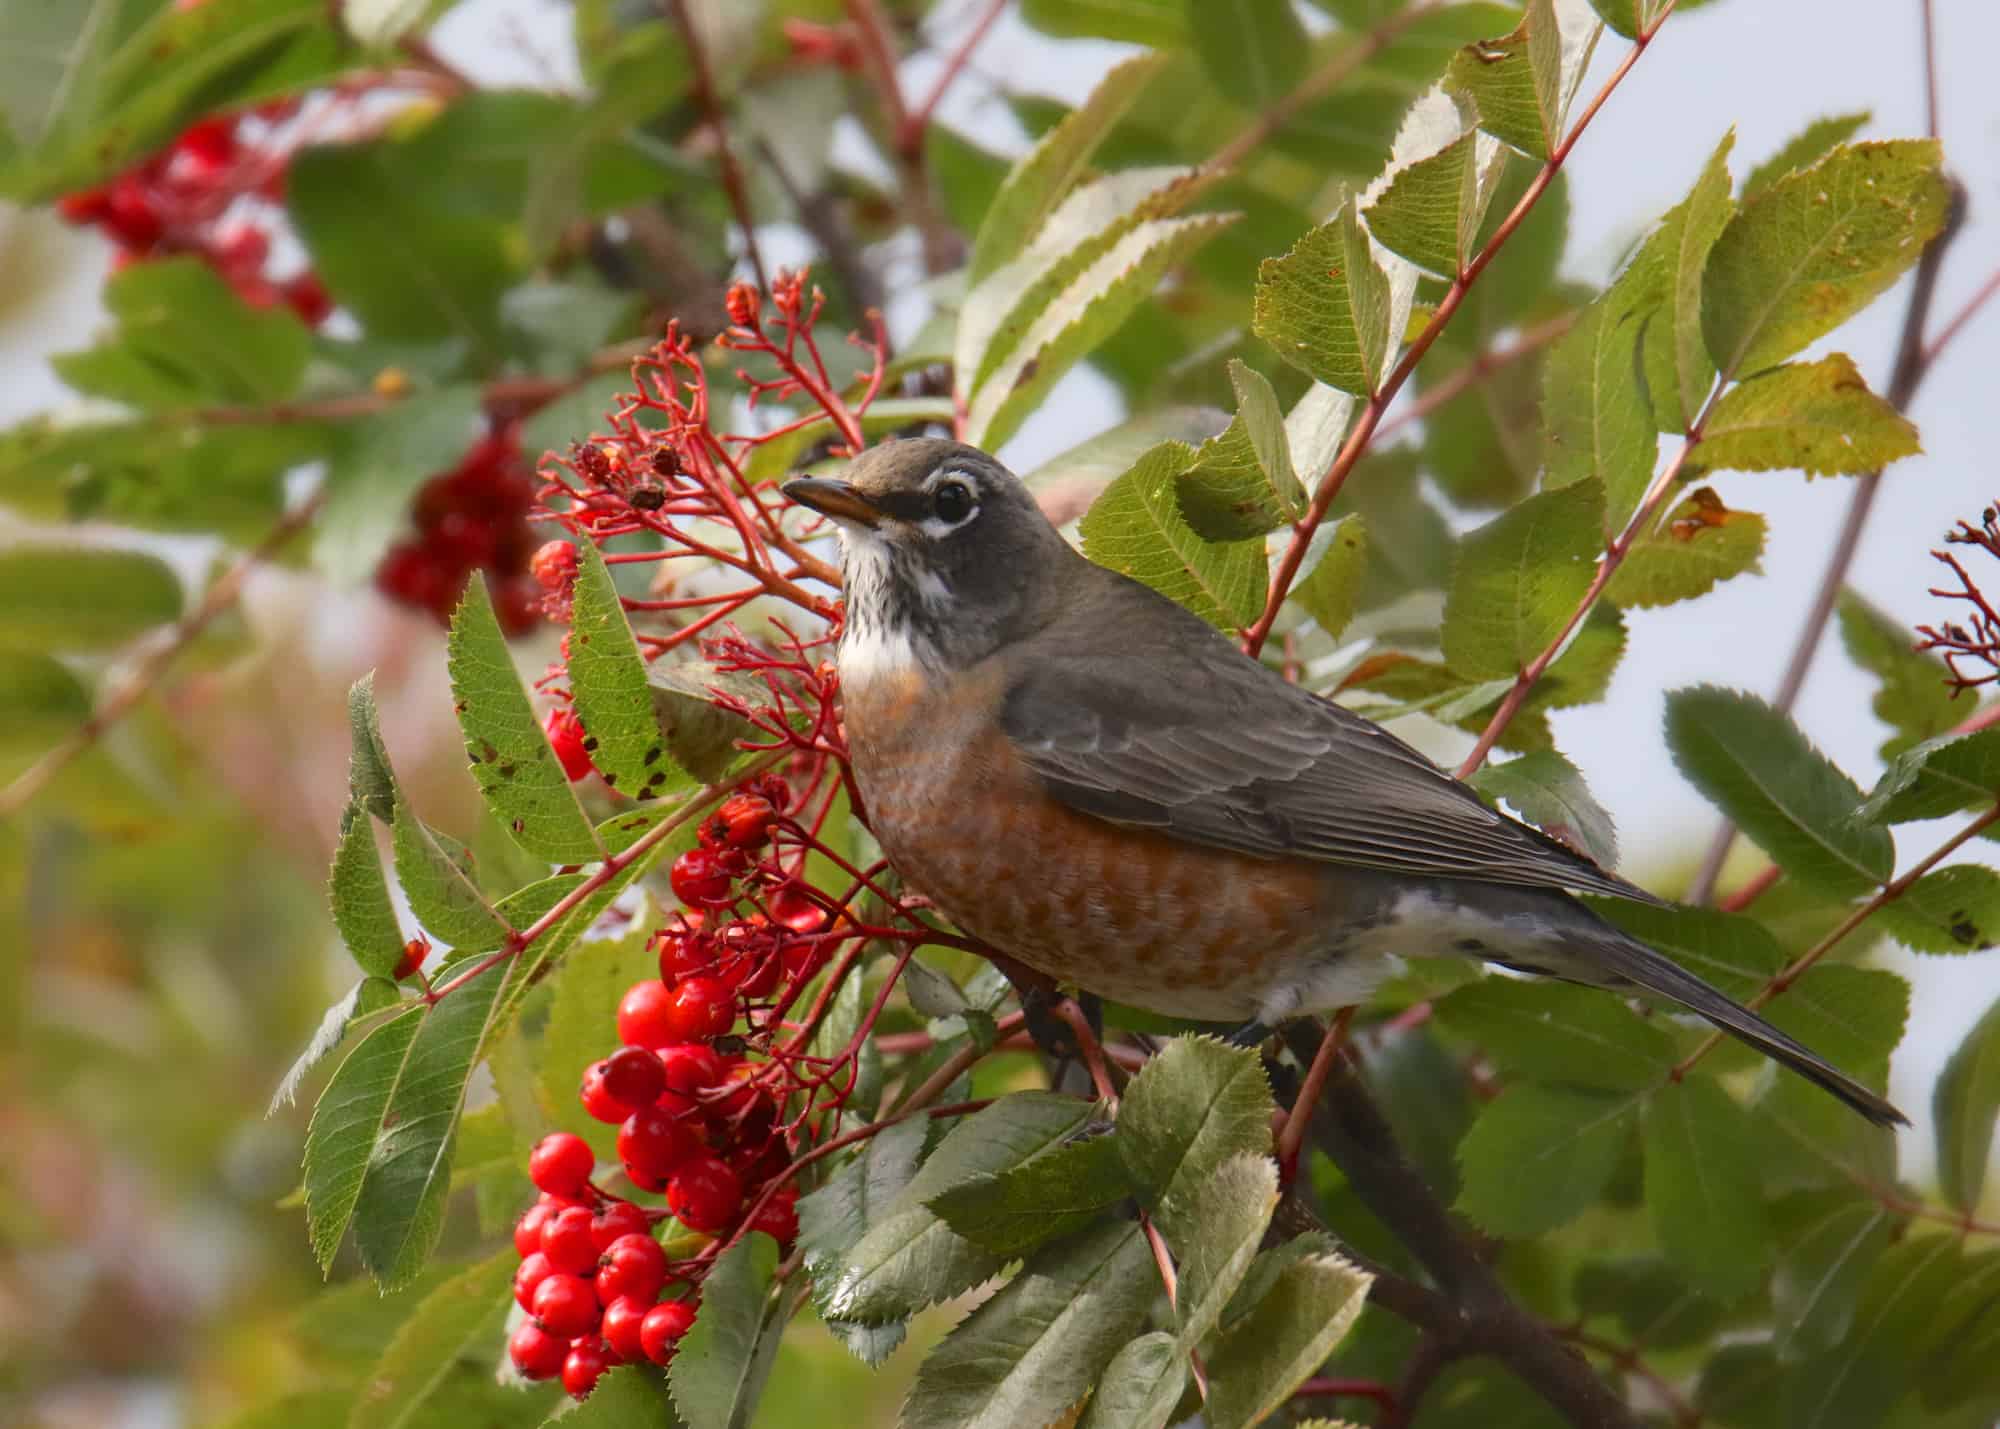 American Robin feasting on some red berries